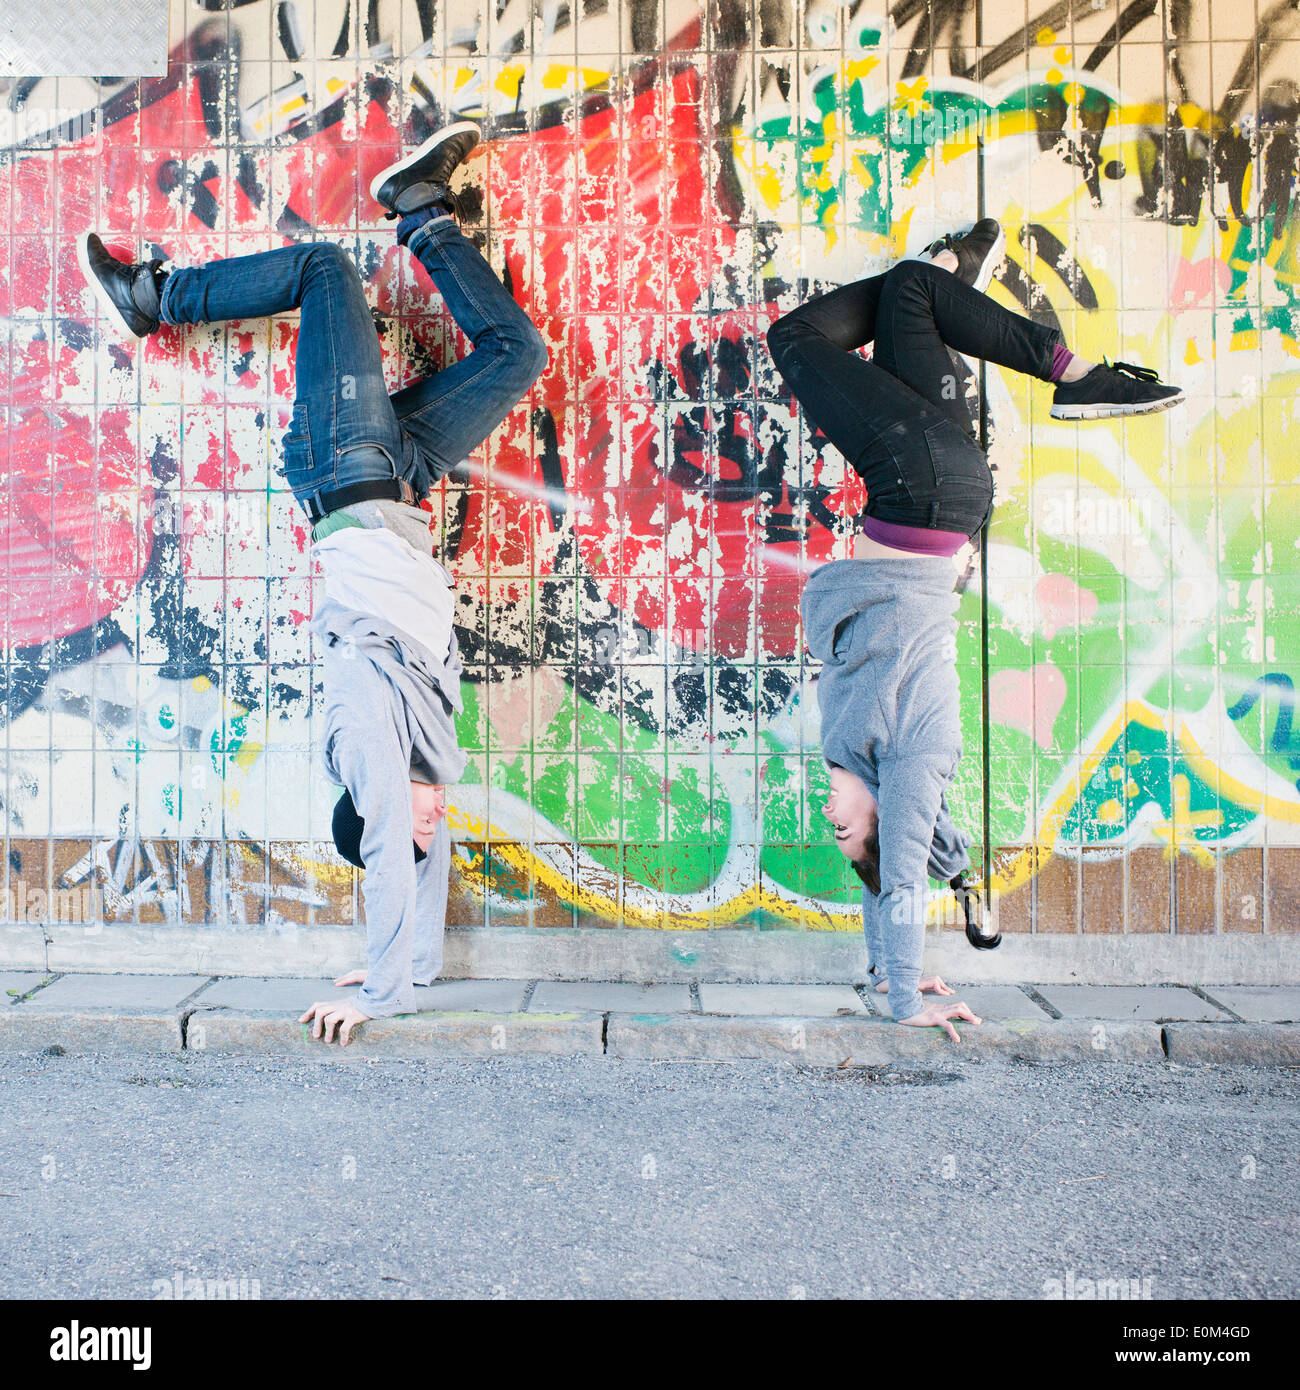 Portrait of young man and woman doing handstand in front of grafitti wall in urban area. Stock Photo